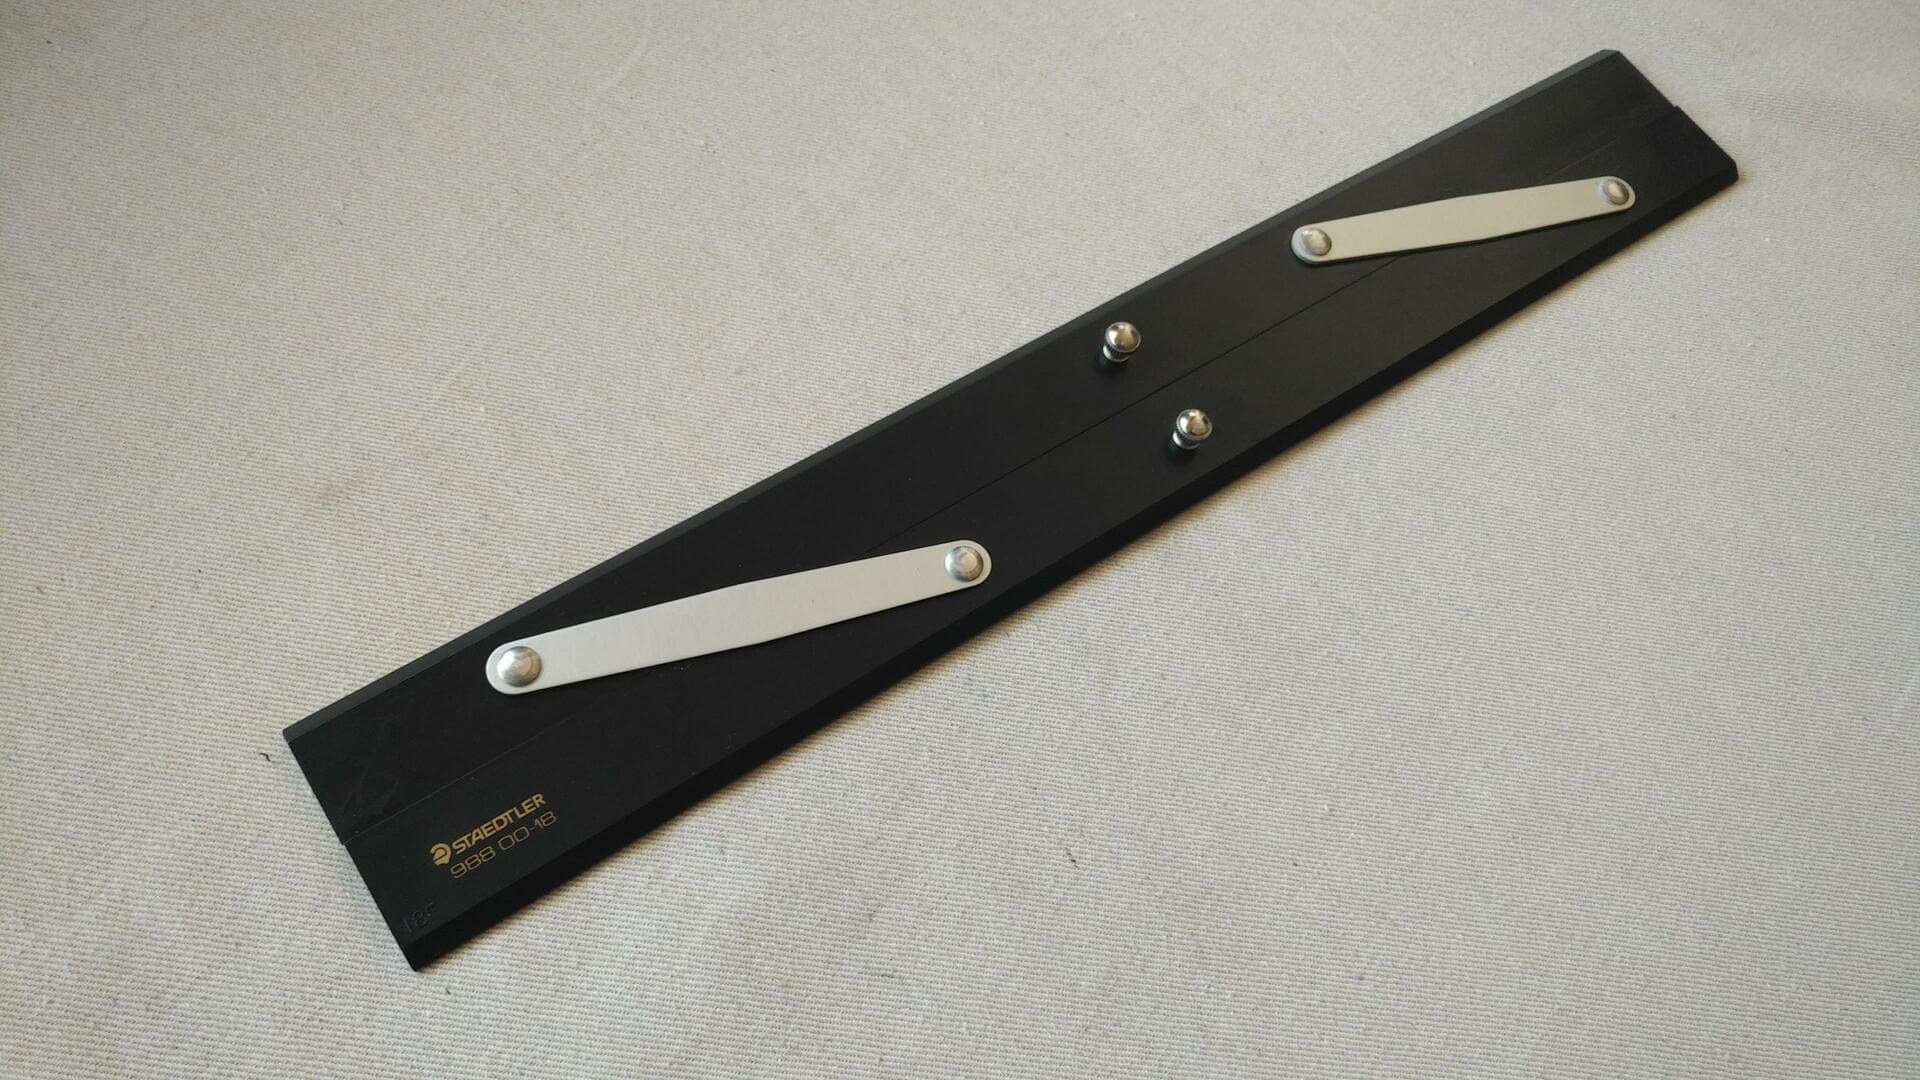 Nice Staedtler #98800-18 adjustable dual parallel ruler i8 inches long. Vintage engineer, architect, and navigation collectible marking and measuring tools